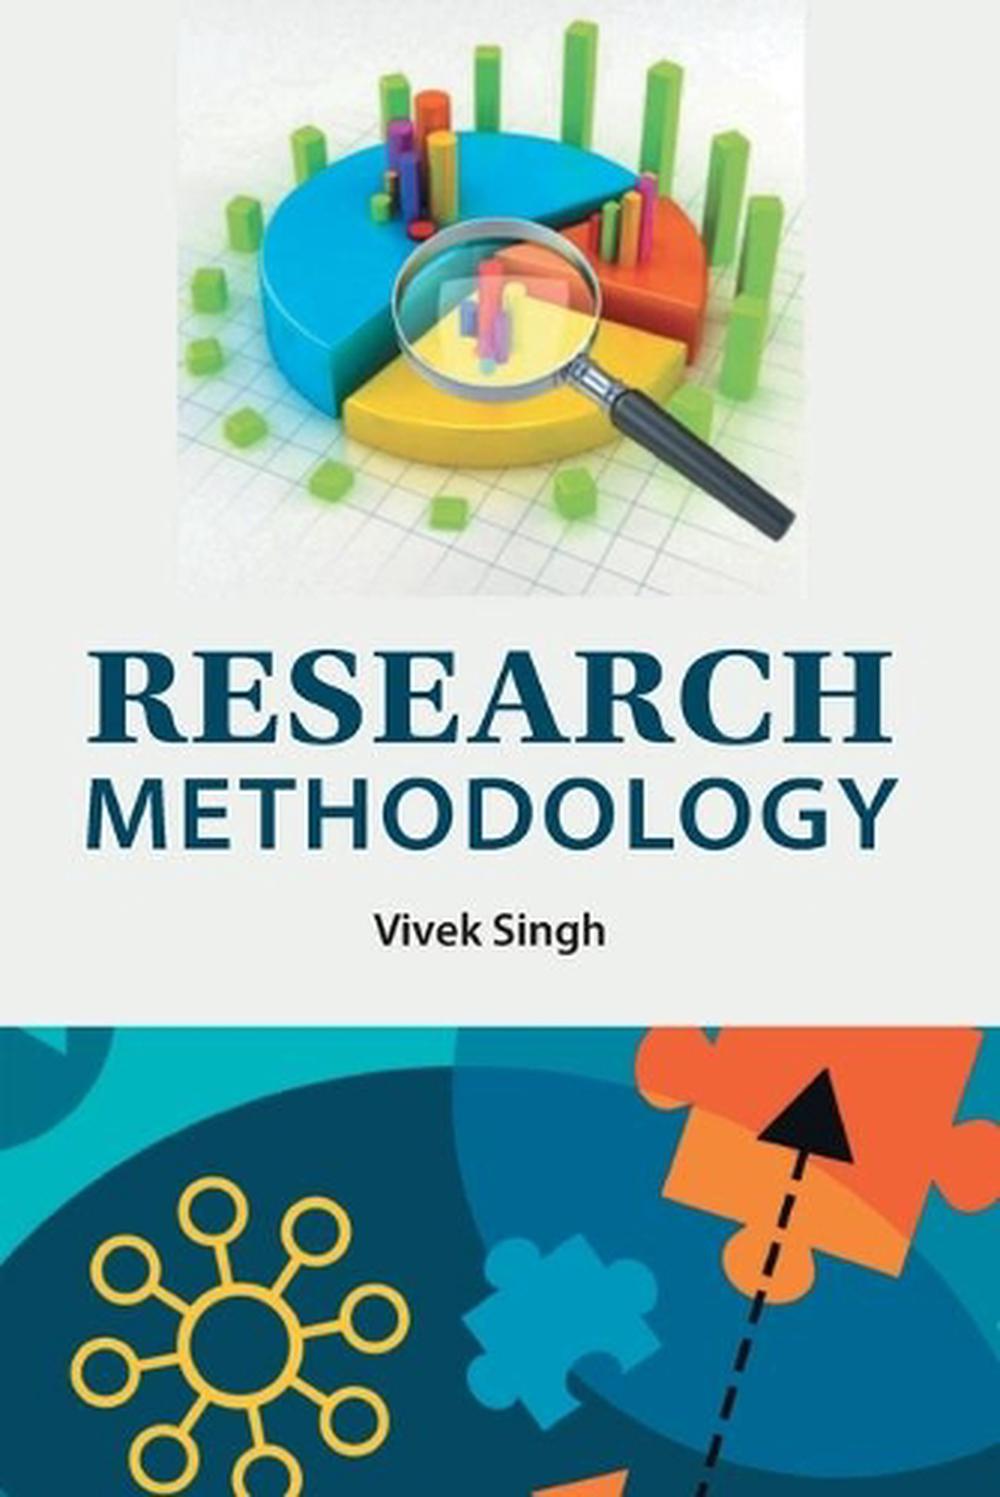 research book for